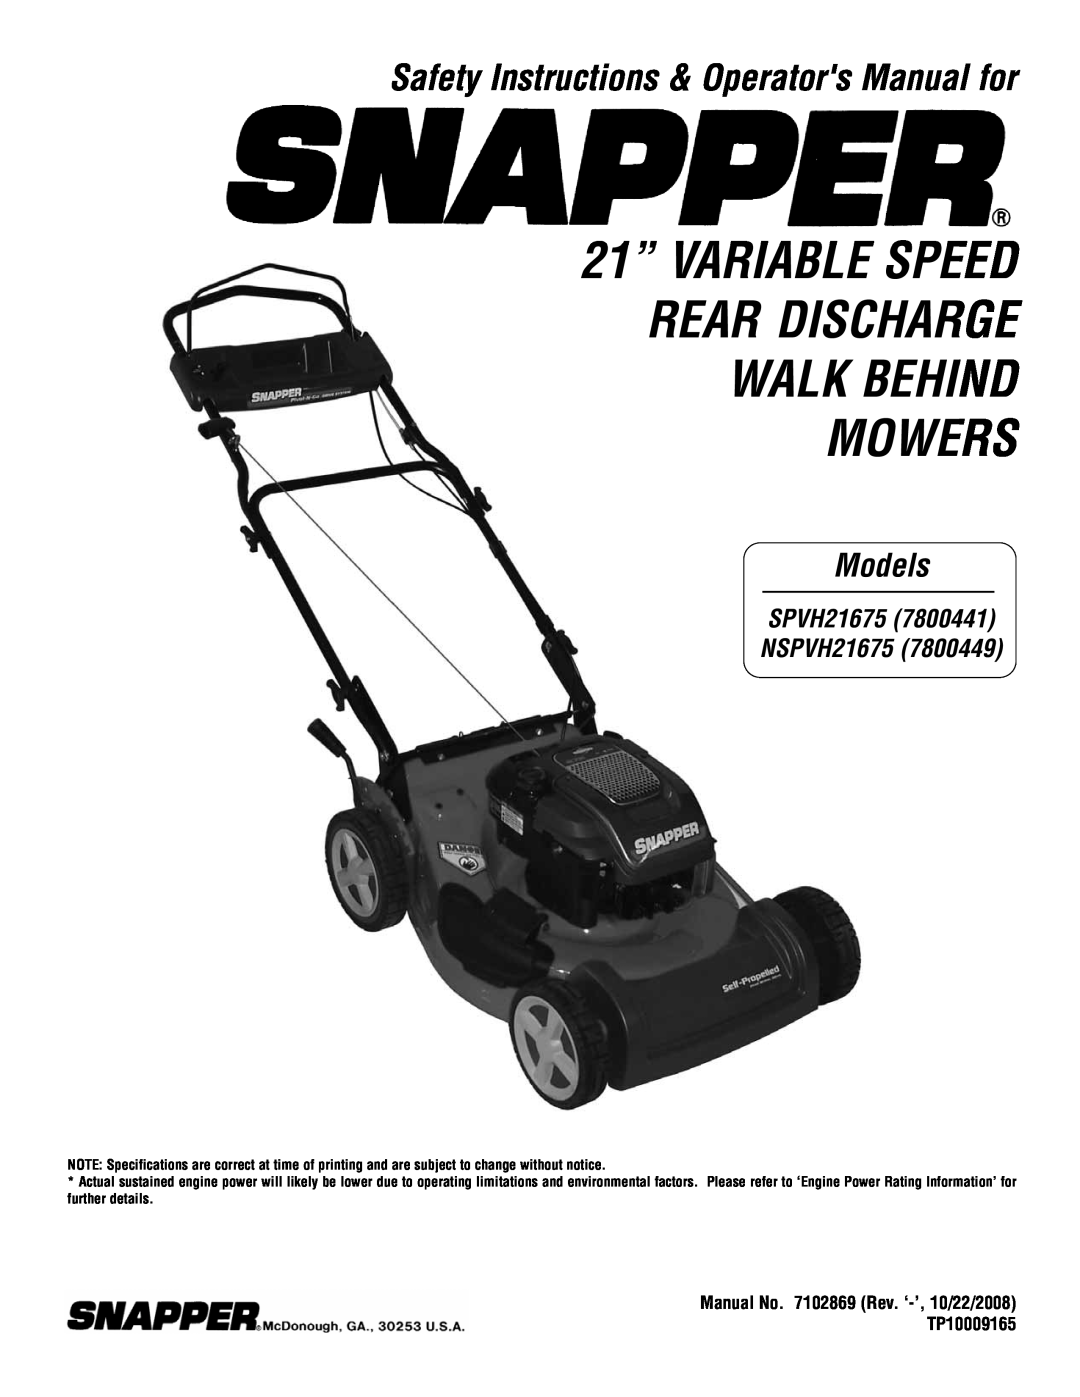 Briggs & Stratton specifications Safety Instructions & Operators Manual for, Models, SPVH21675 NSPVH21675 